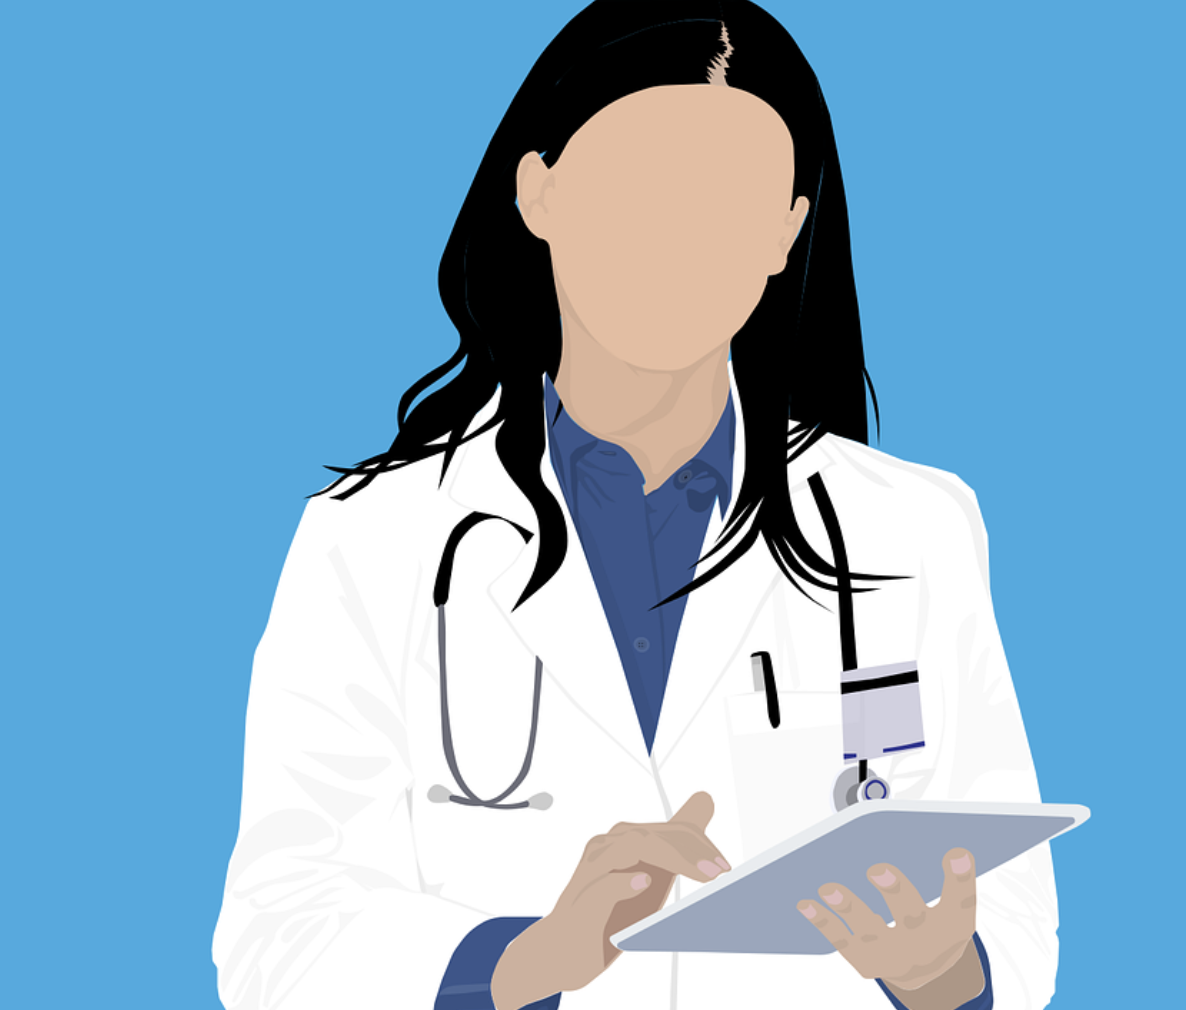 Health care worker, vector image